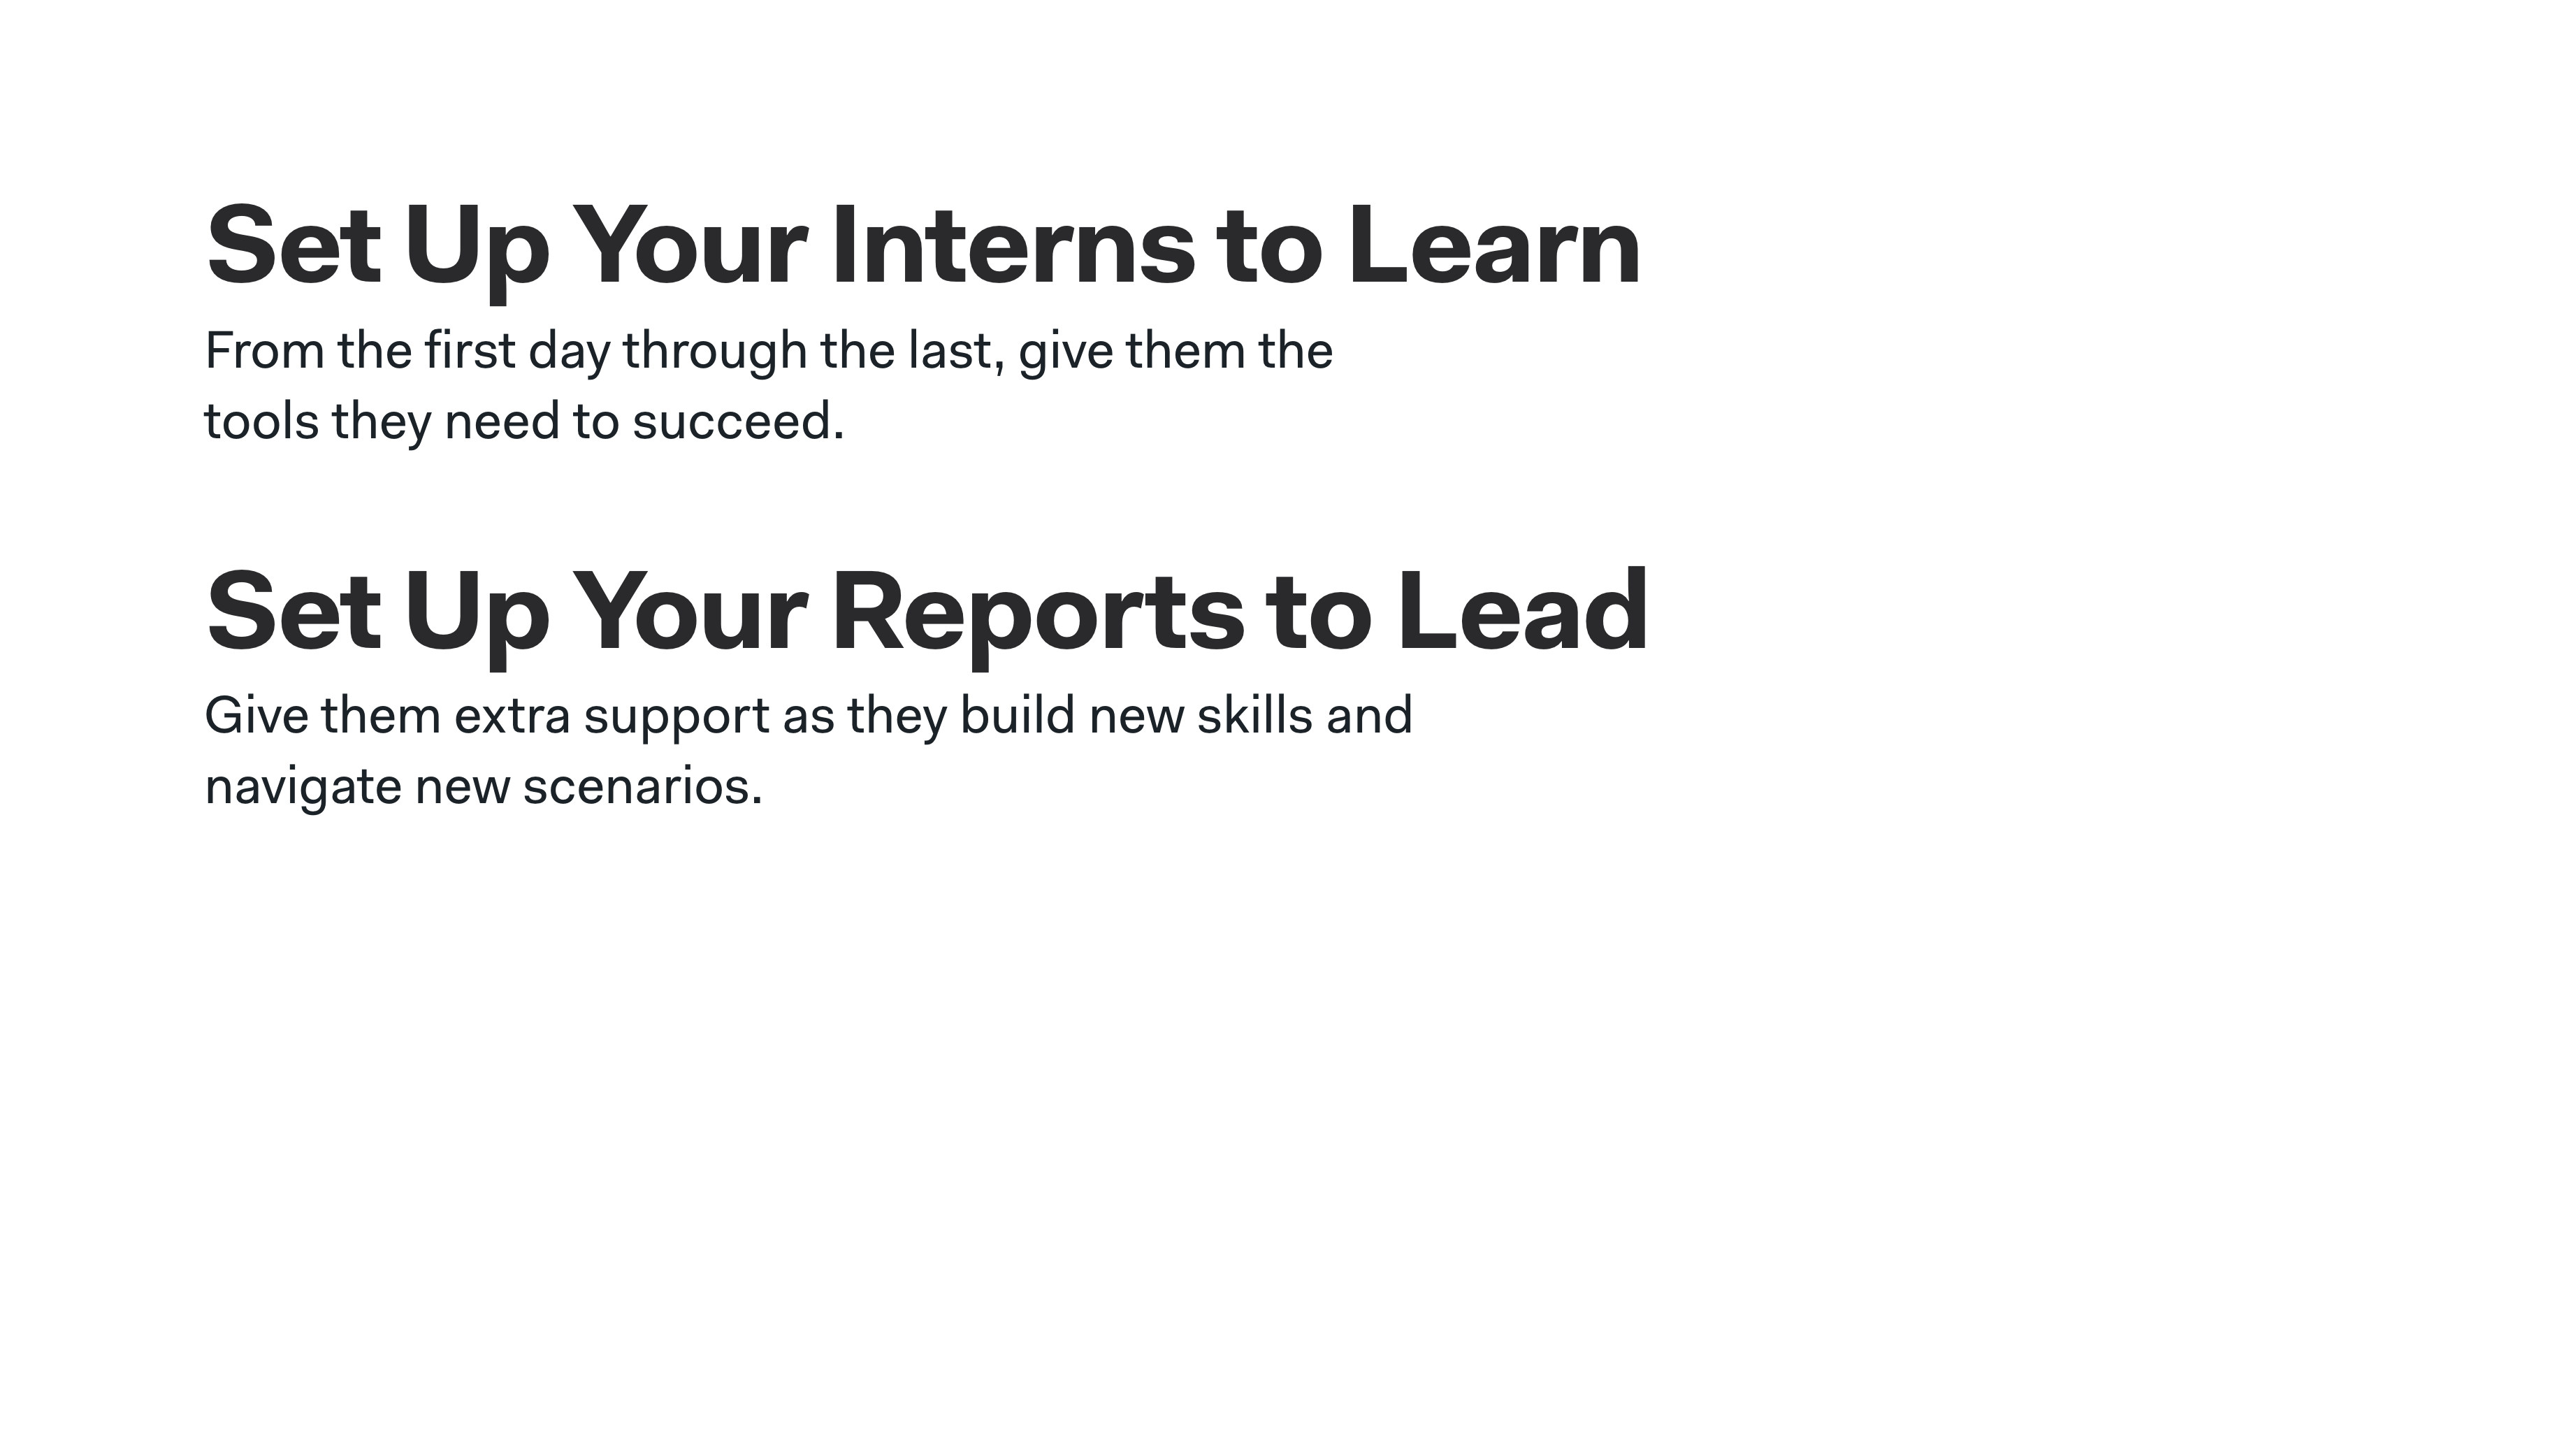 Slide with two bold phrases: Set Up Your Interns to Learn and Set Up Your Reports to Lead